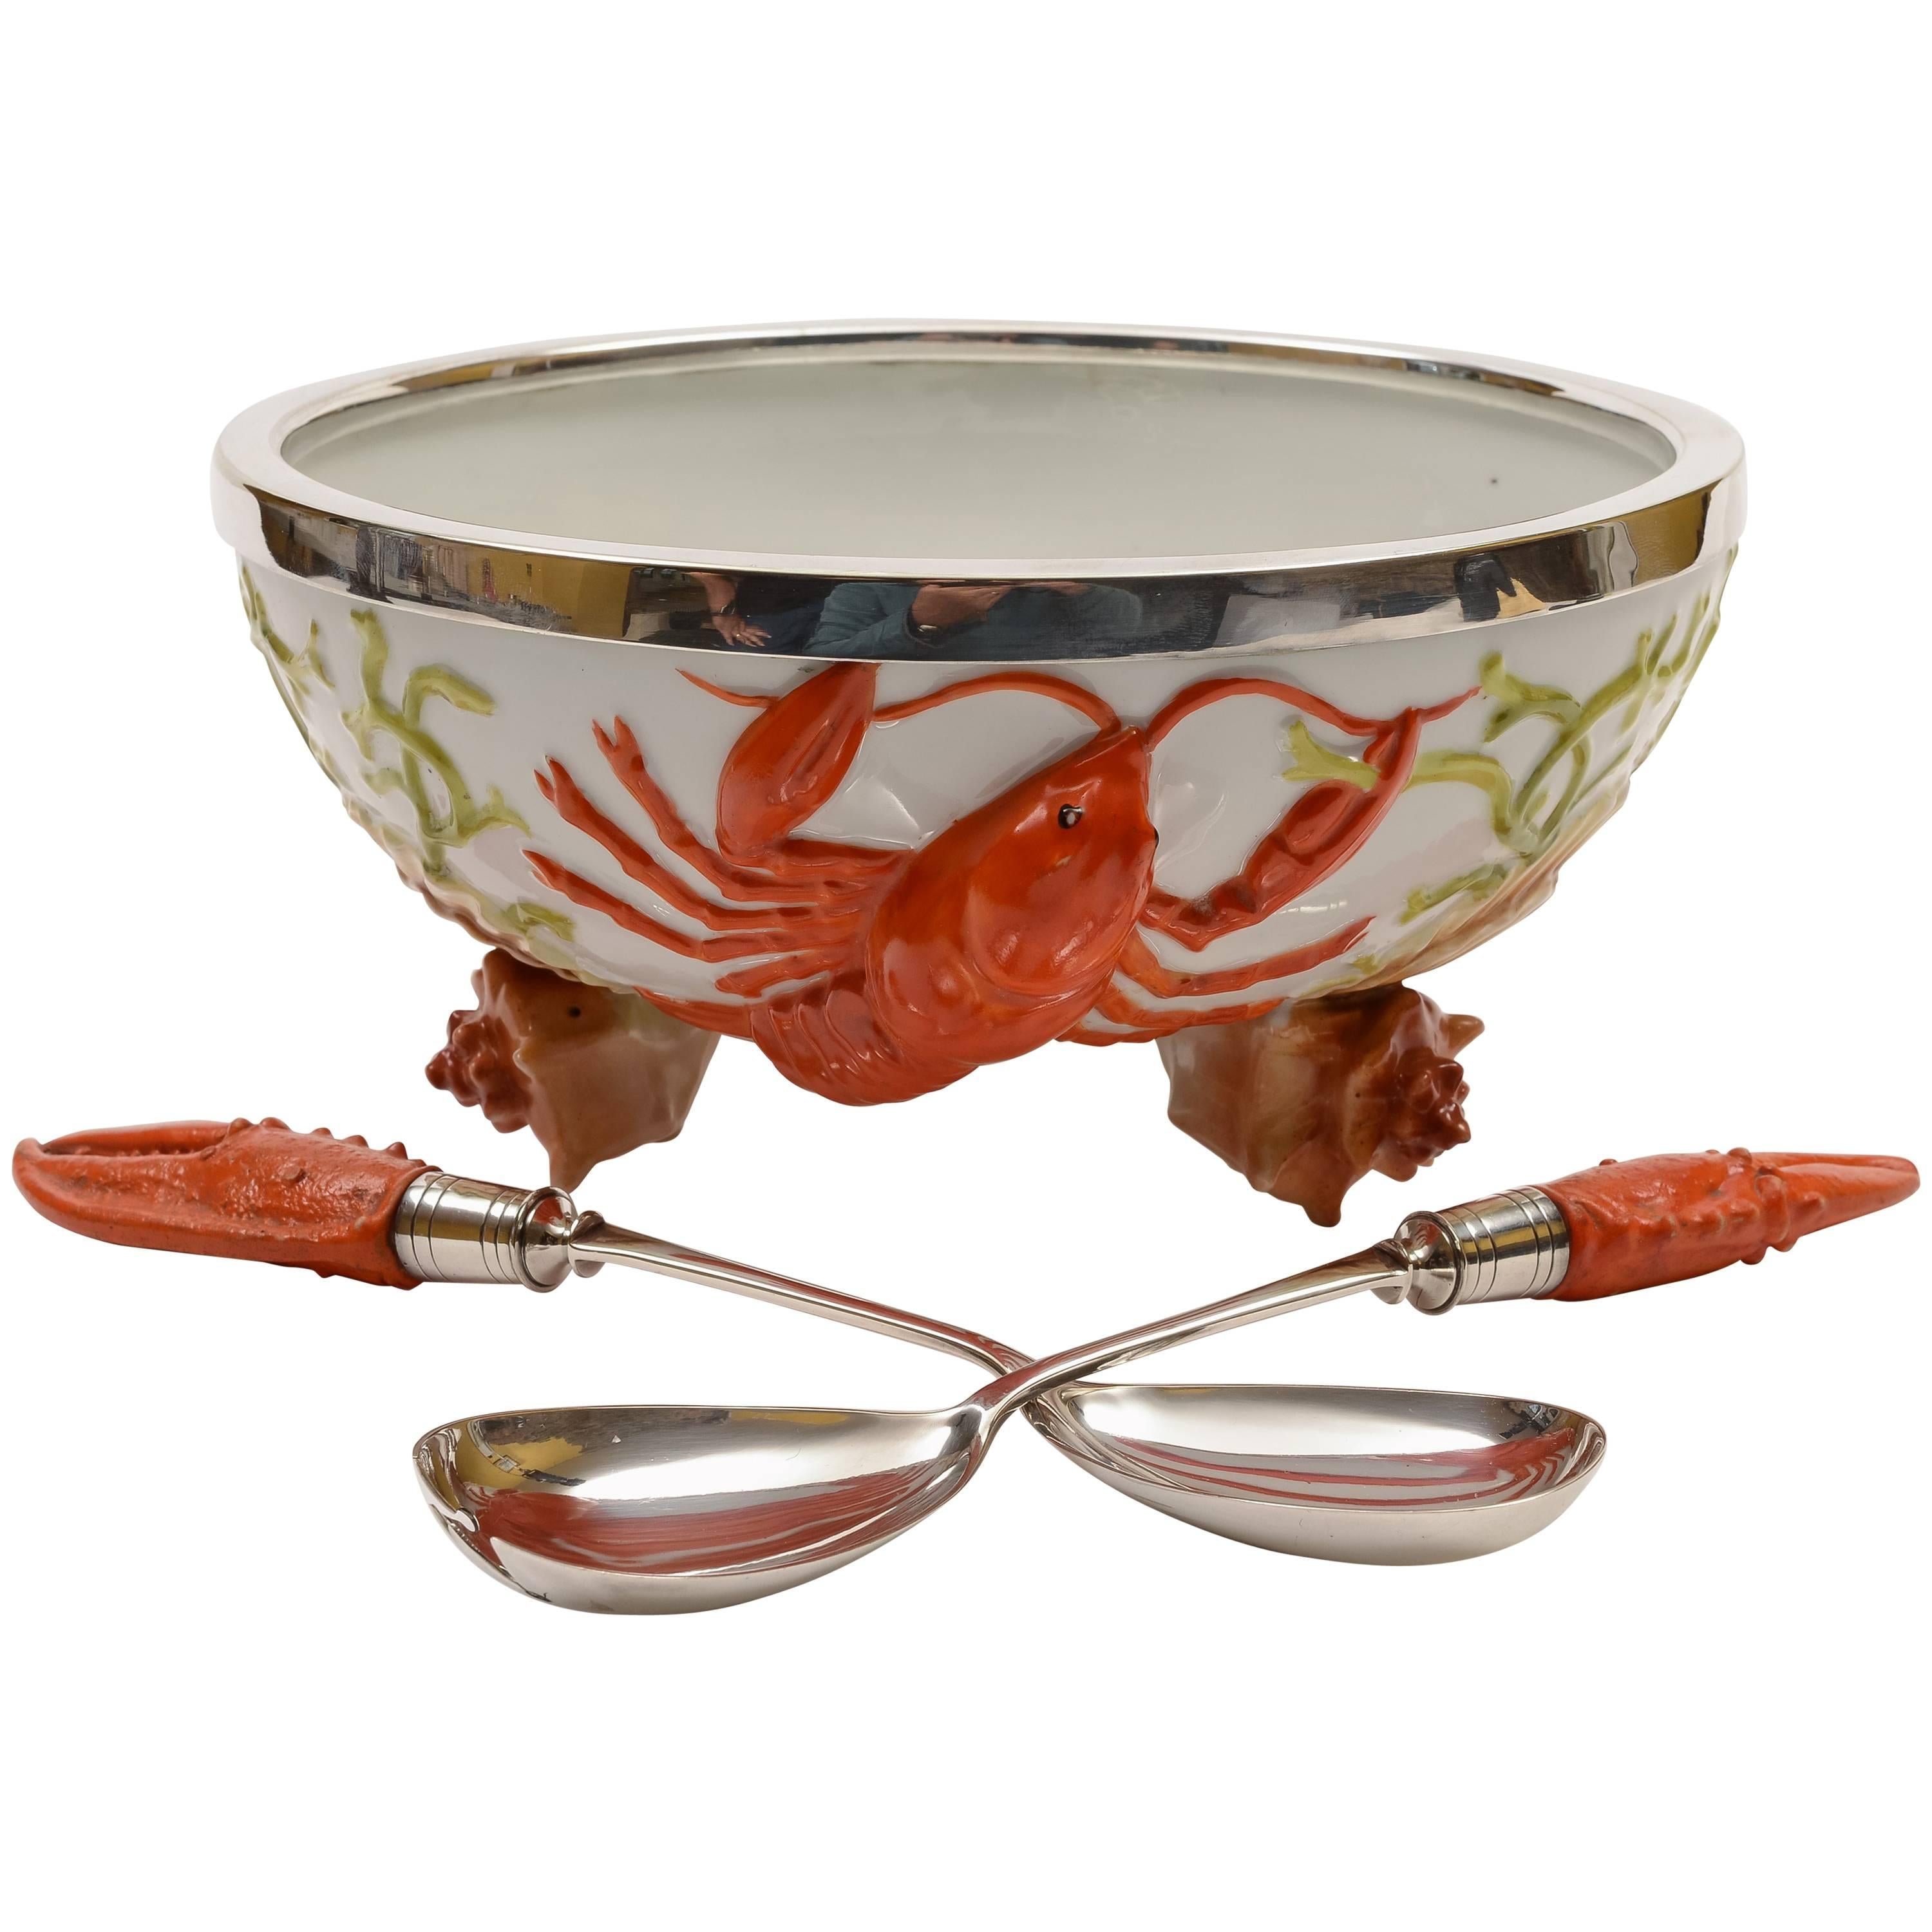 20th Century Edwardian Continental China Salad Bowl with Servers